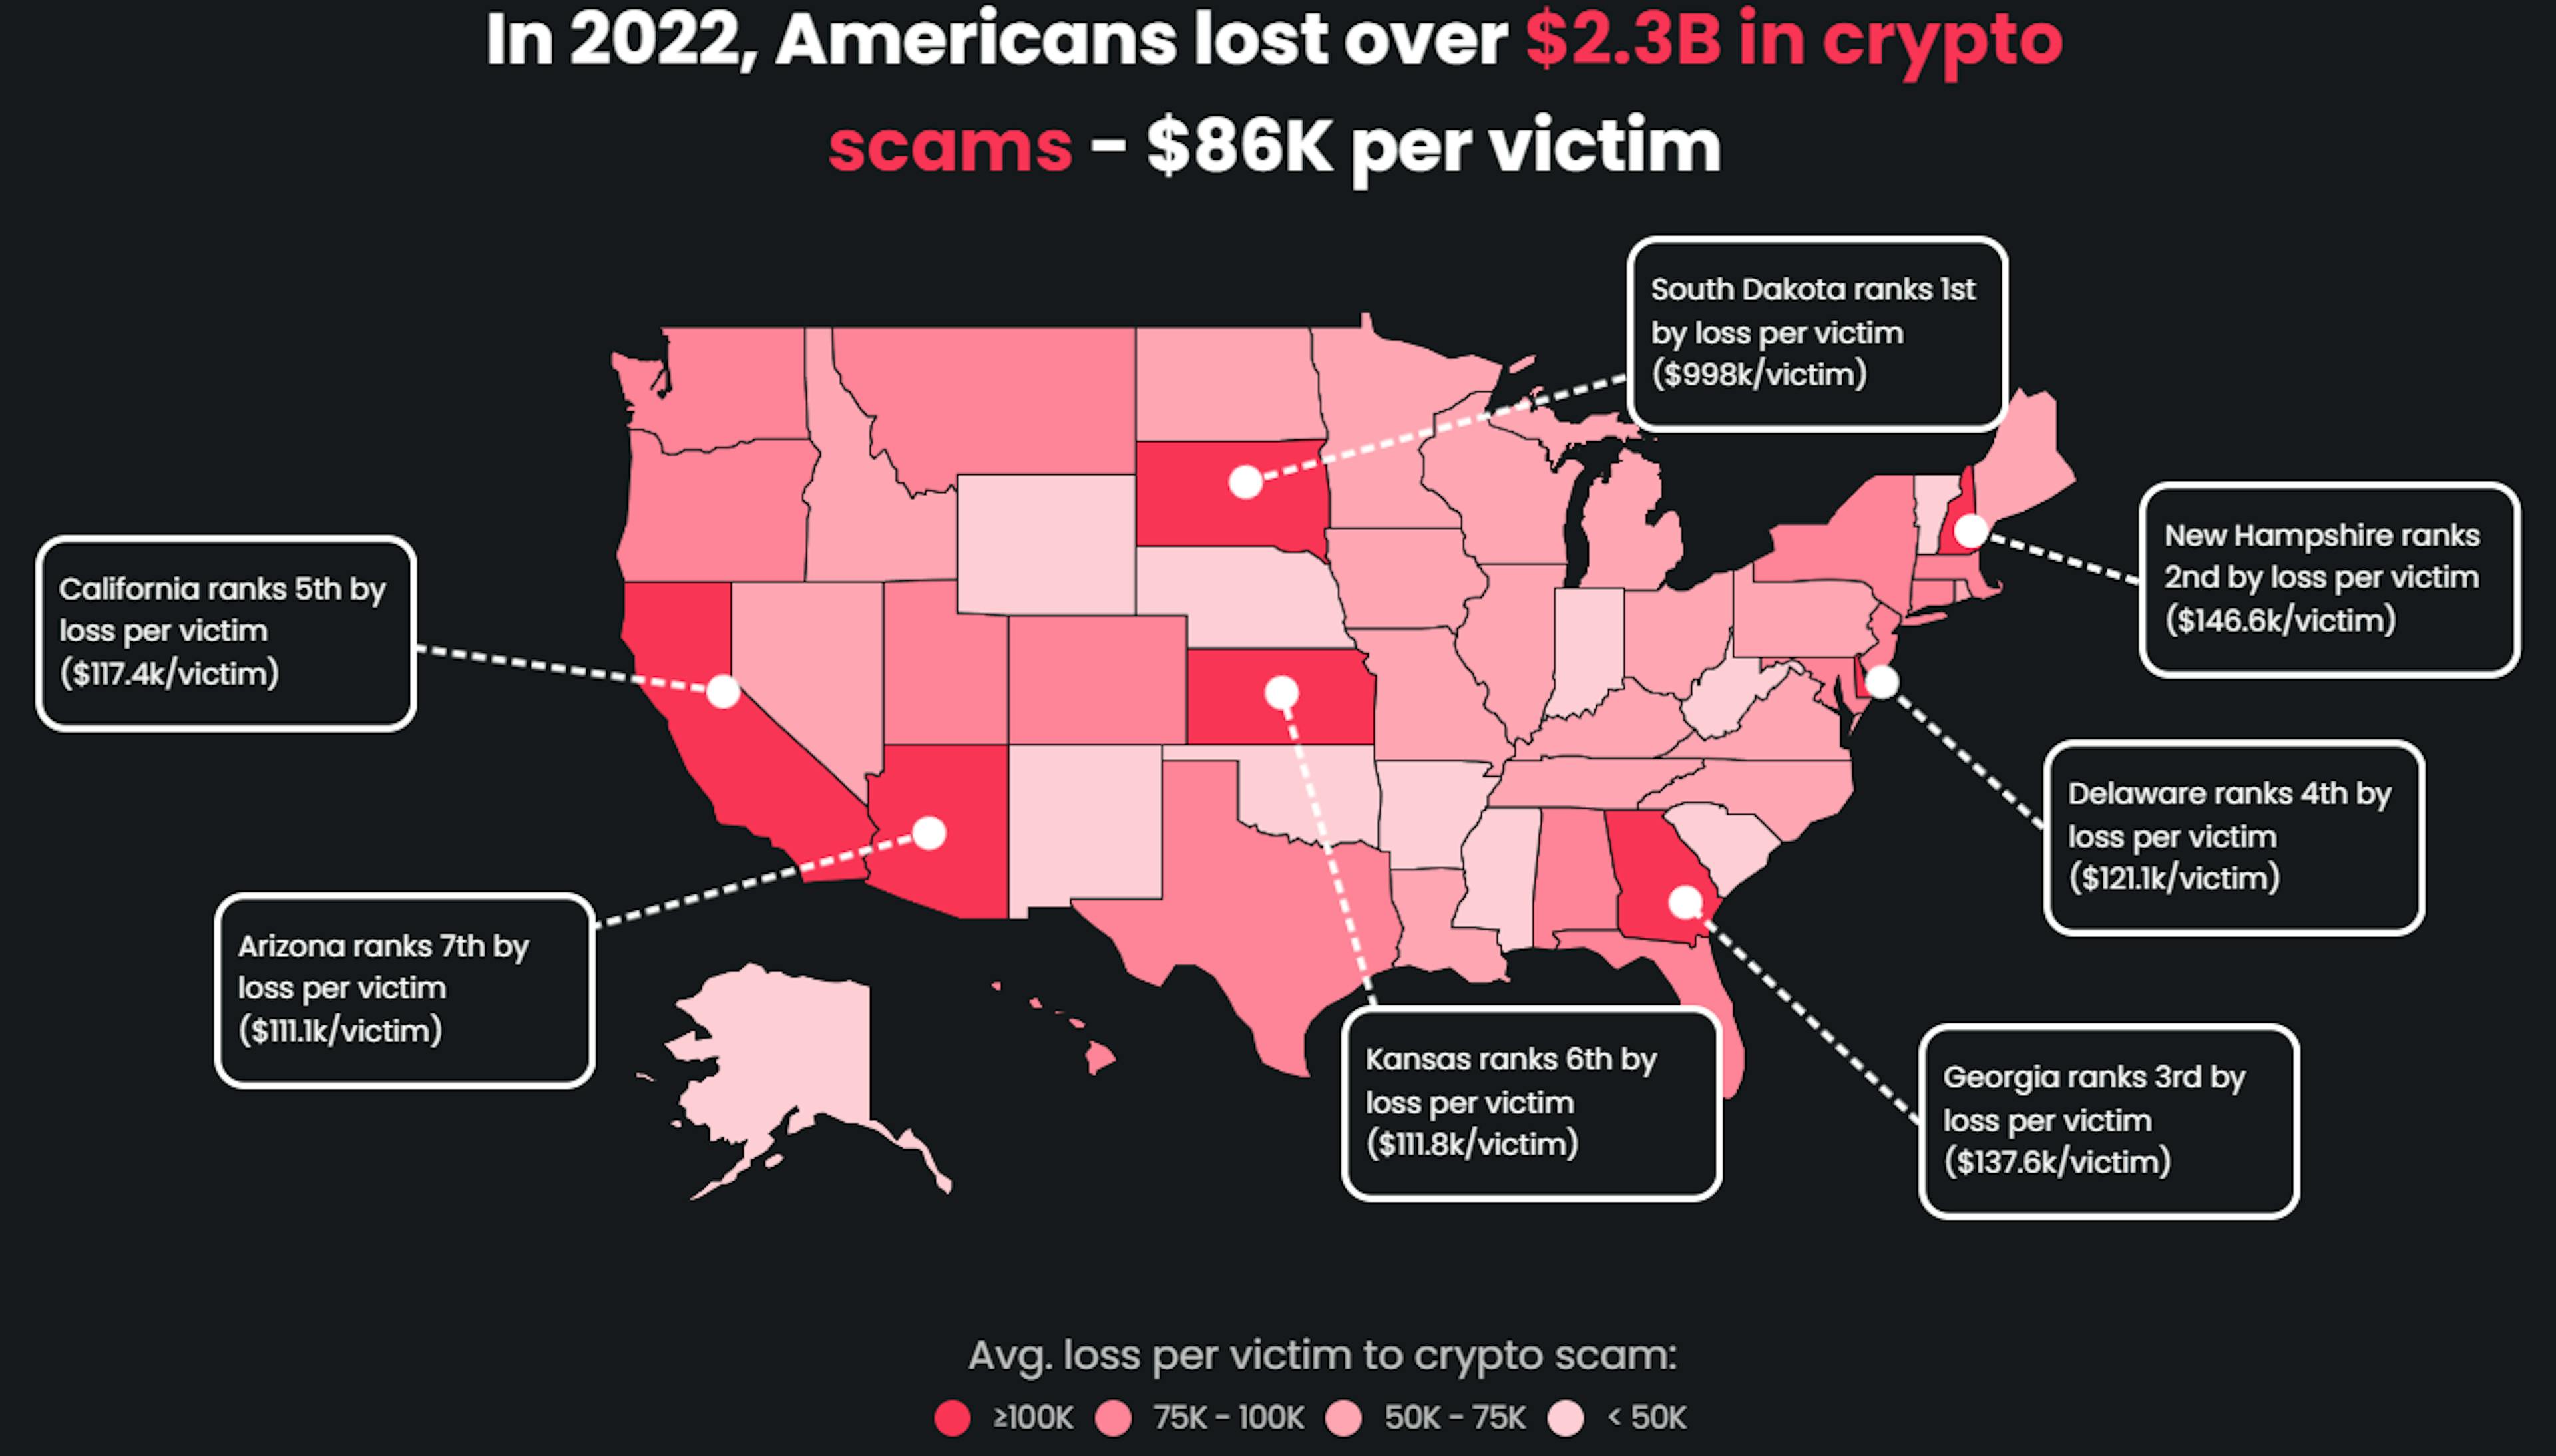 Source:https://surfshark.com/research/chart/us-cryptocurrency-scams 